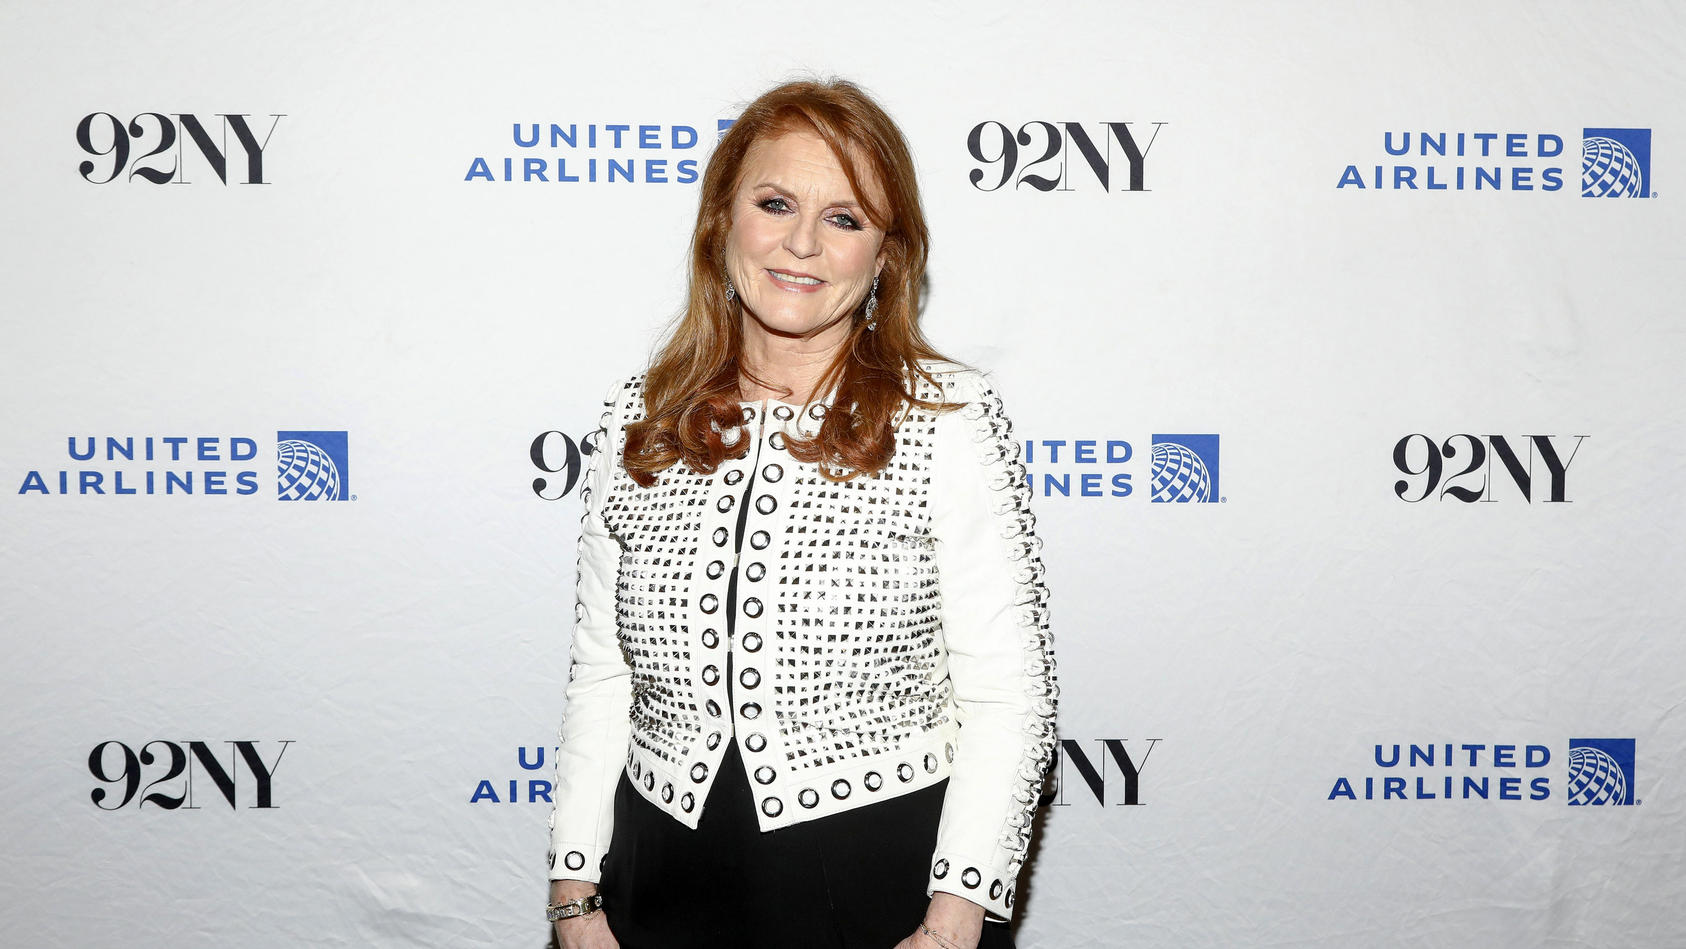 Sarah Ferguson, Duchess of York, poses backstage before discussing her novel "A Most Intriguing Lady" at the 92nd Street Y on Monday, March 6, 2023, in New York. (Photo by Andy Kropa/Invision/AP)